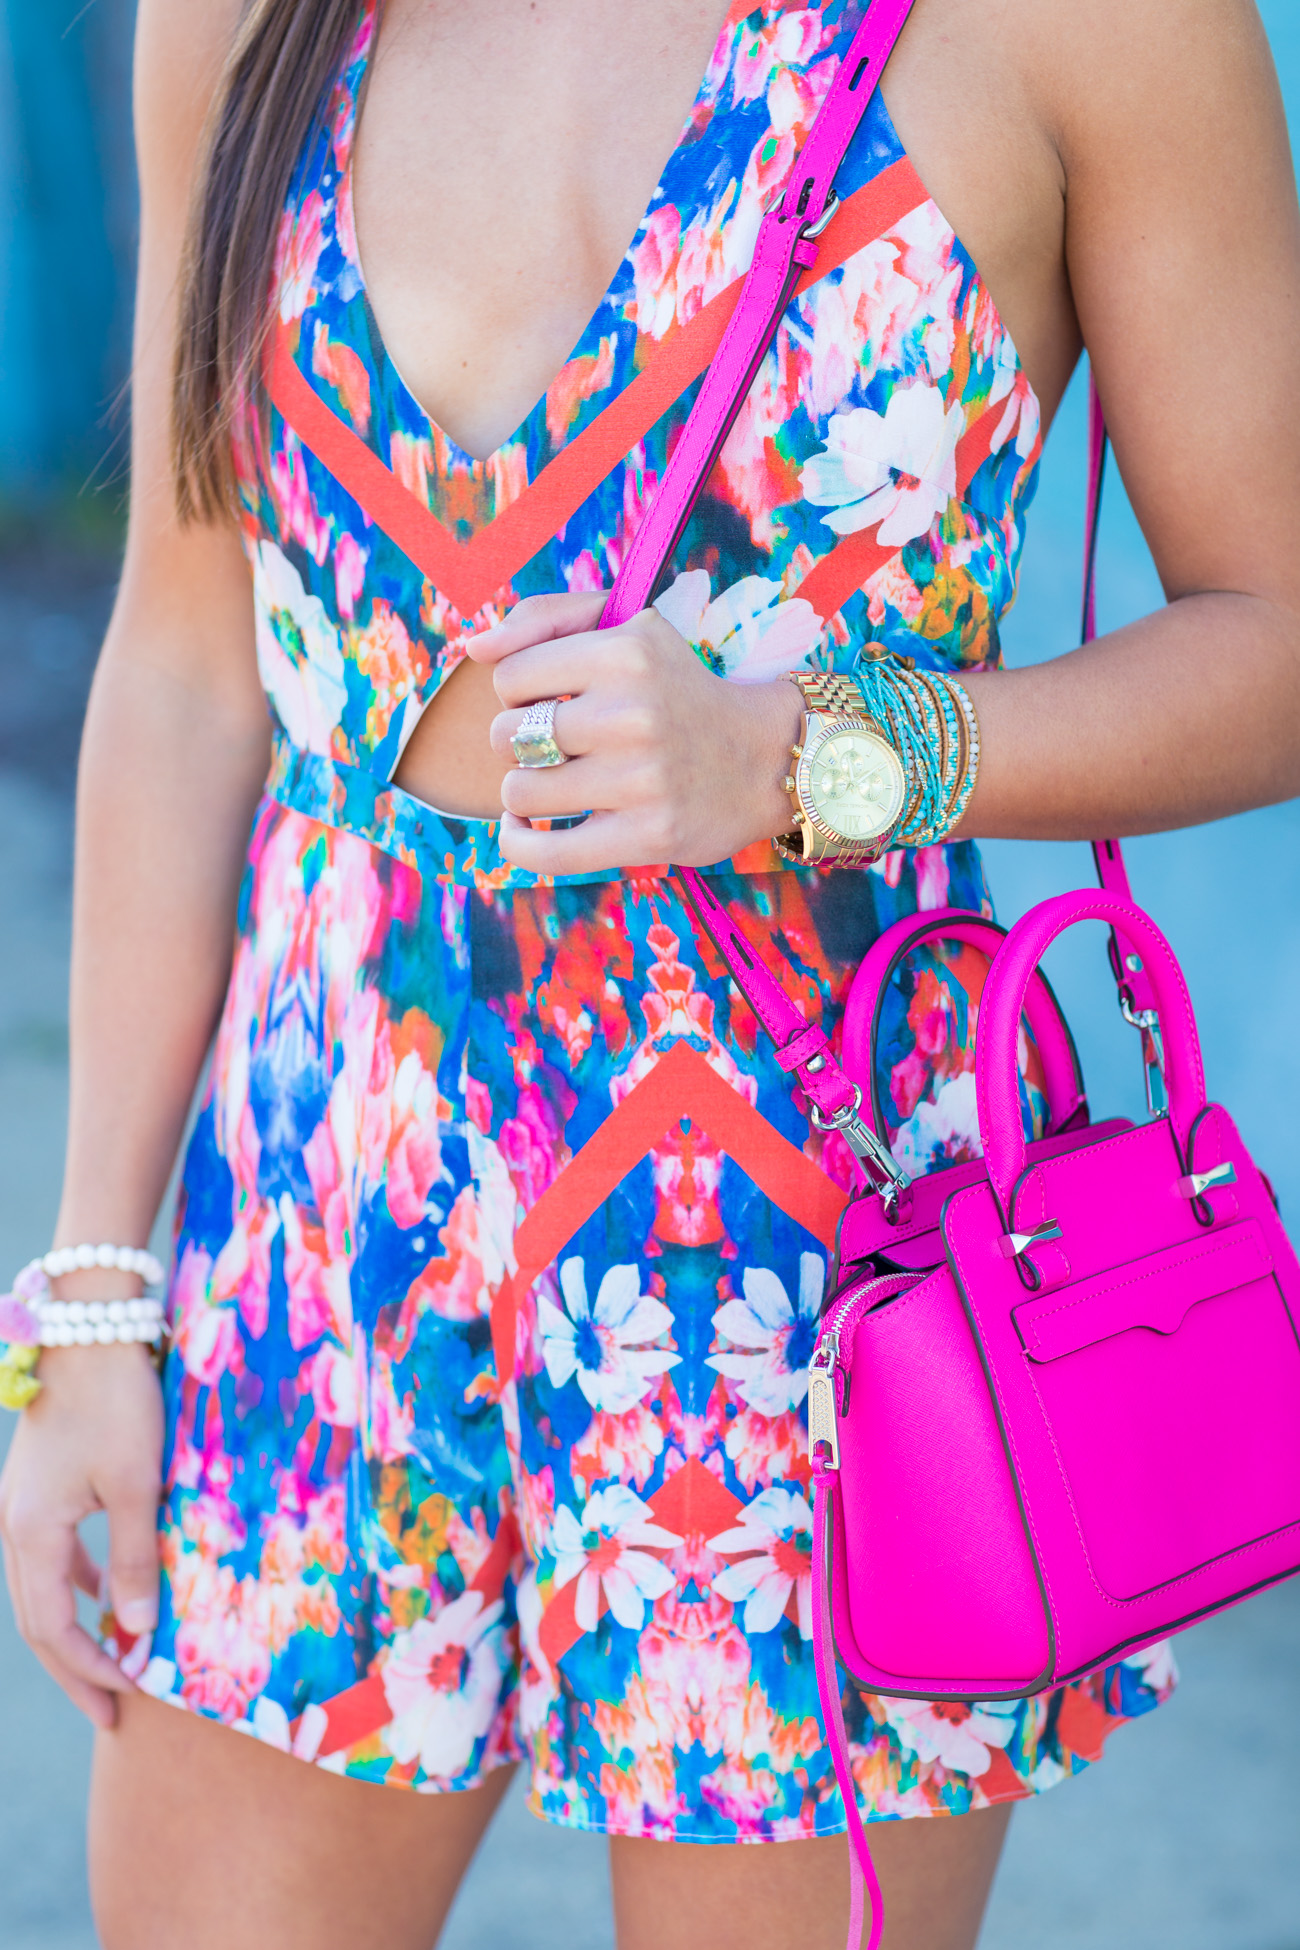 halter romper, cutout romper, halter cutout romper, spring romper, floral print romper, floral romper, nbd romper, nbd x revolve romper, rebecca minkoff micro avery tote, fuchsia crossbody bag, fuchsia tote, pink flash lens aviators, floral outfit, summer romper, summer fashion, summer style, colorful outfit ideas, // grace wainwright a southern drawl